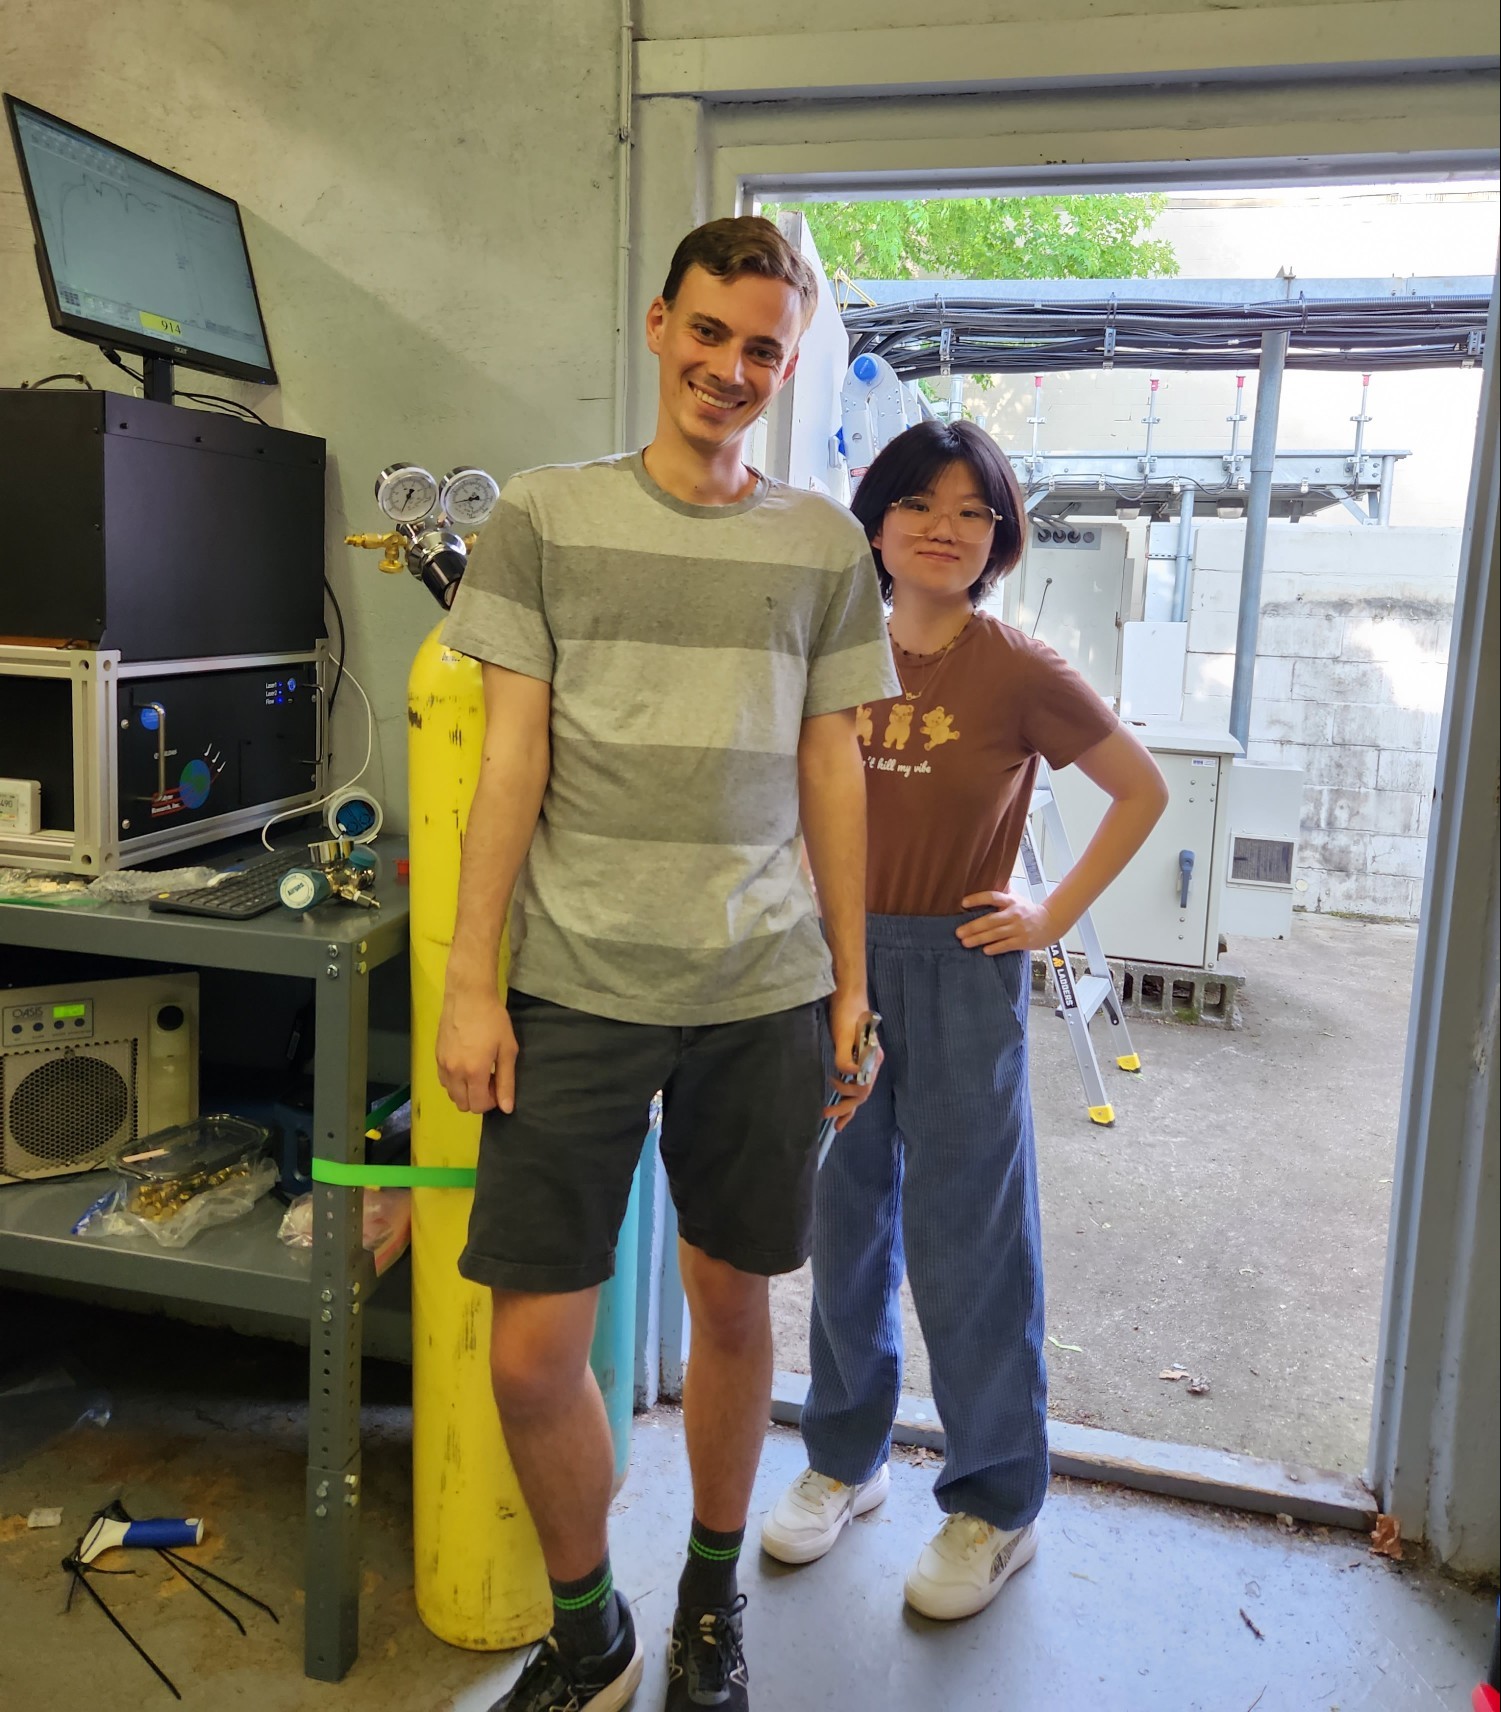 Yuwei and Andrew standing in front of the QCLS instrument at the Mineola tower during FROG-NY